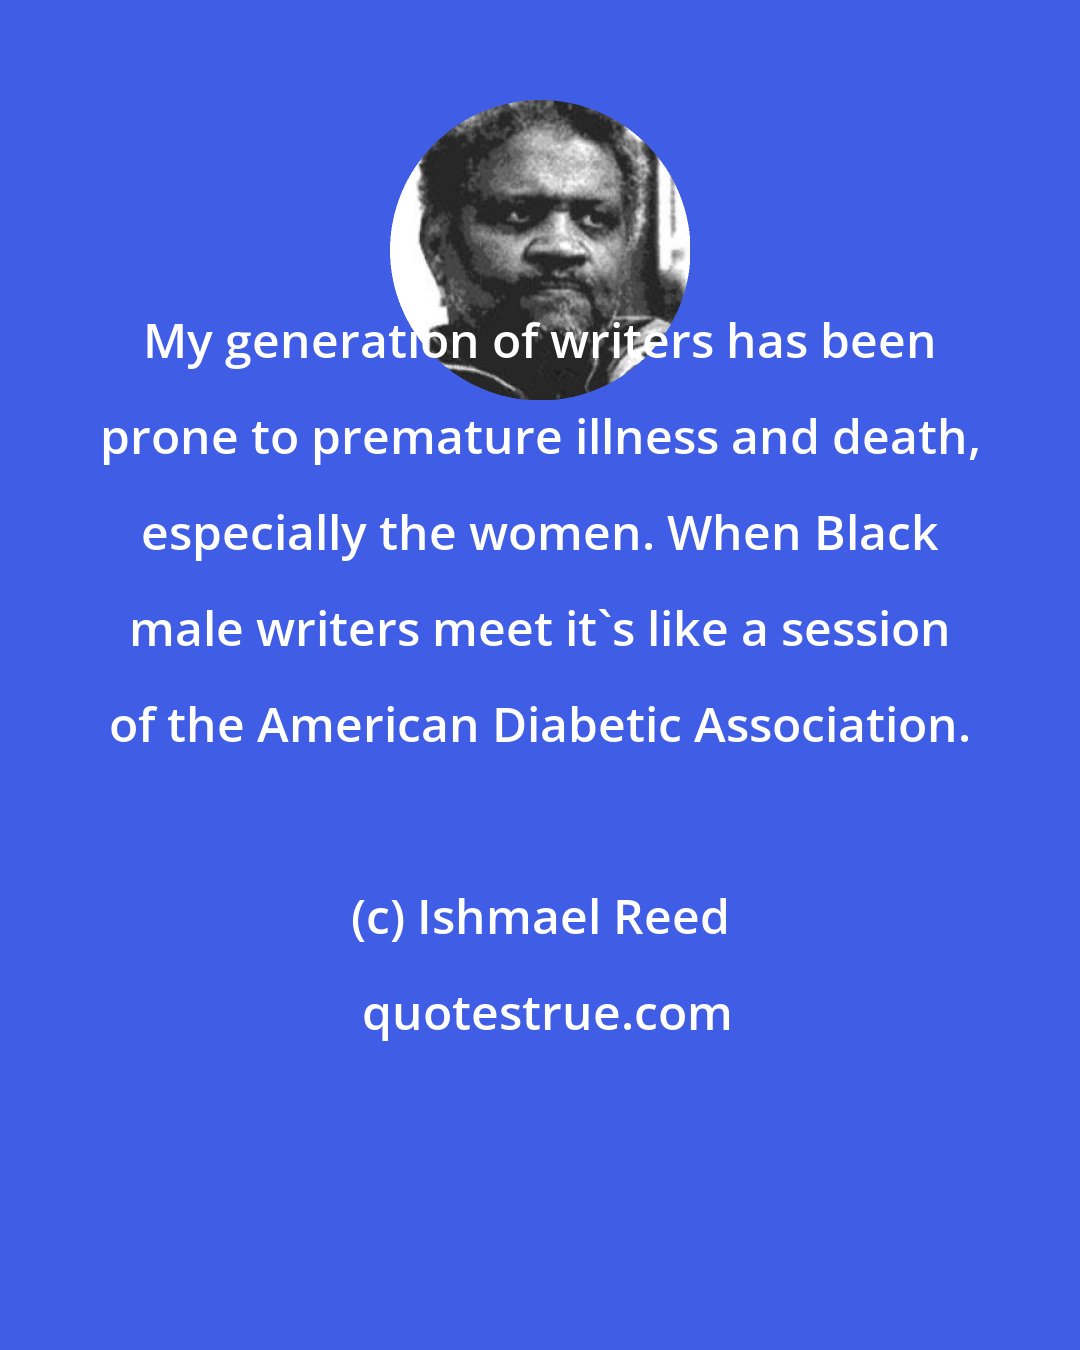 Ishmael Reed: My generation of writers has been prone to premature illness and death, especially the women. When Black male writers meet it's like a session of the American Diabetic Association.